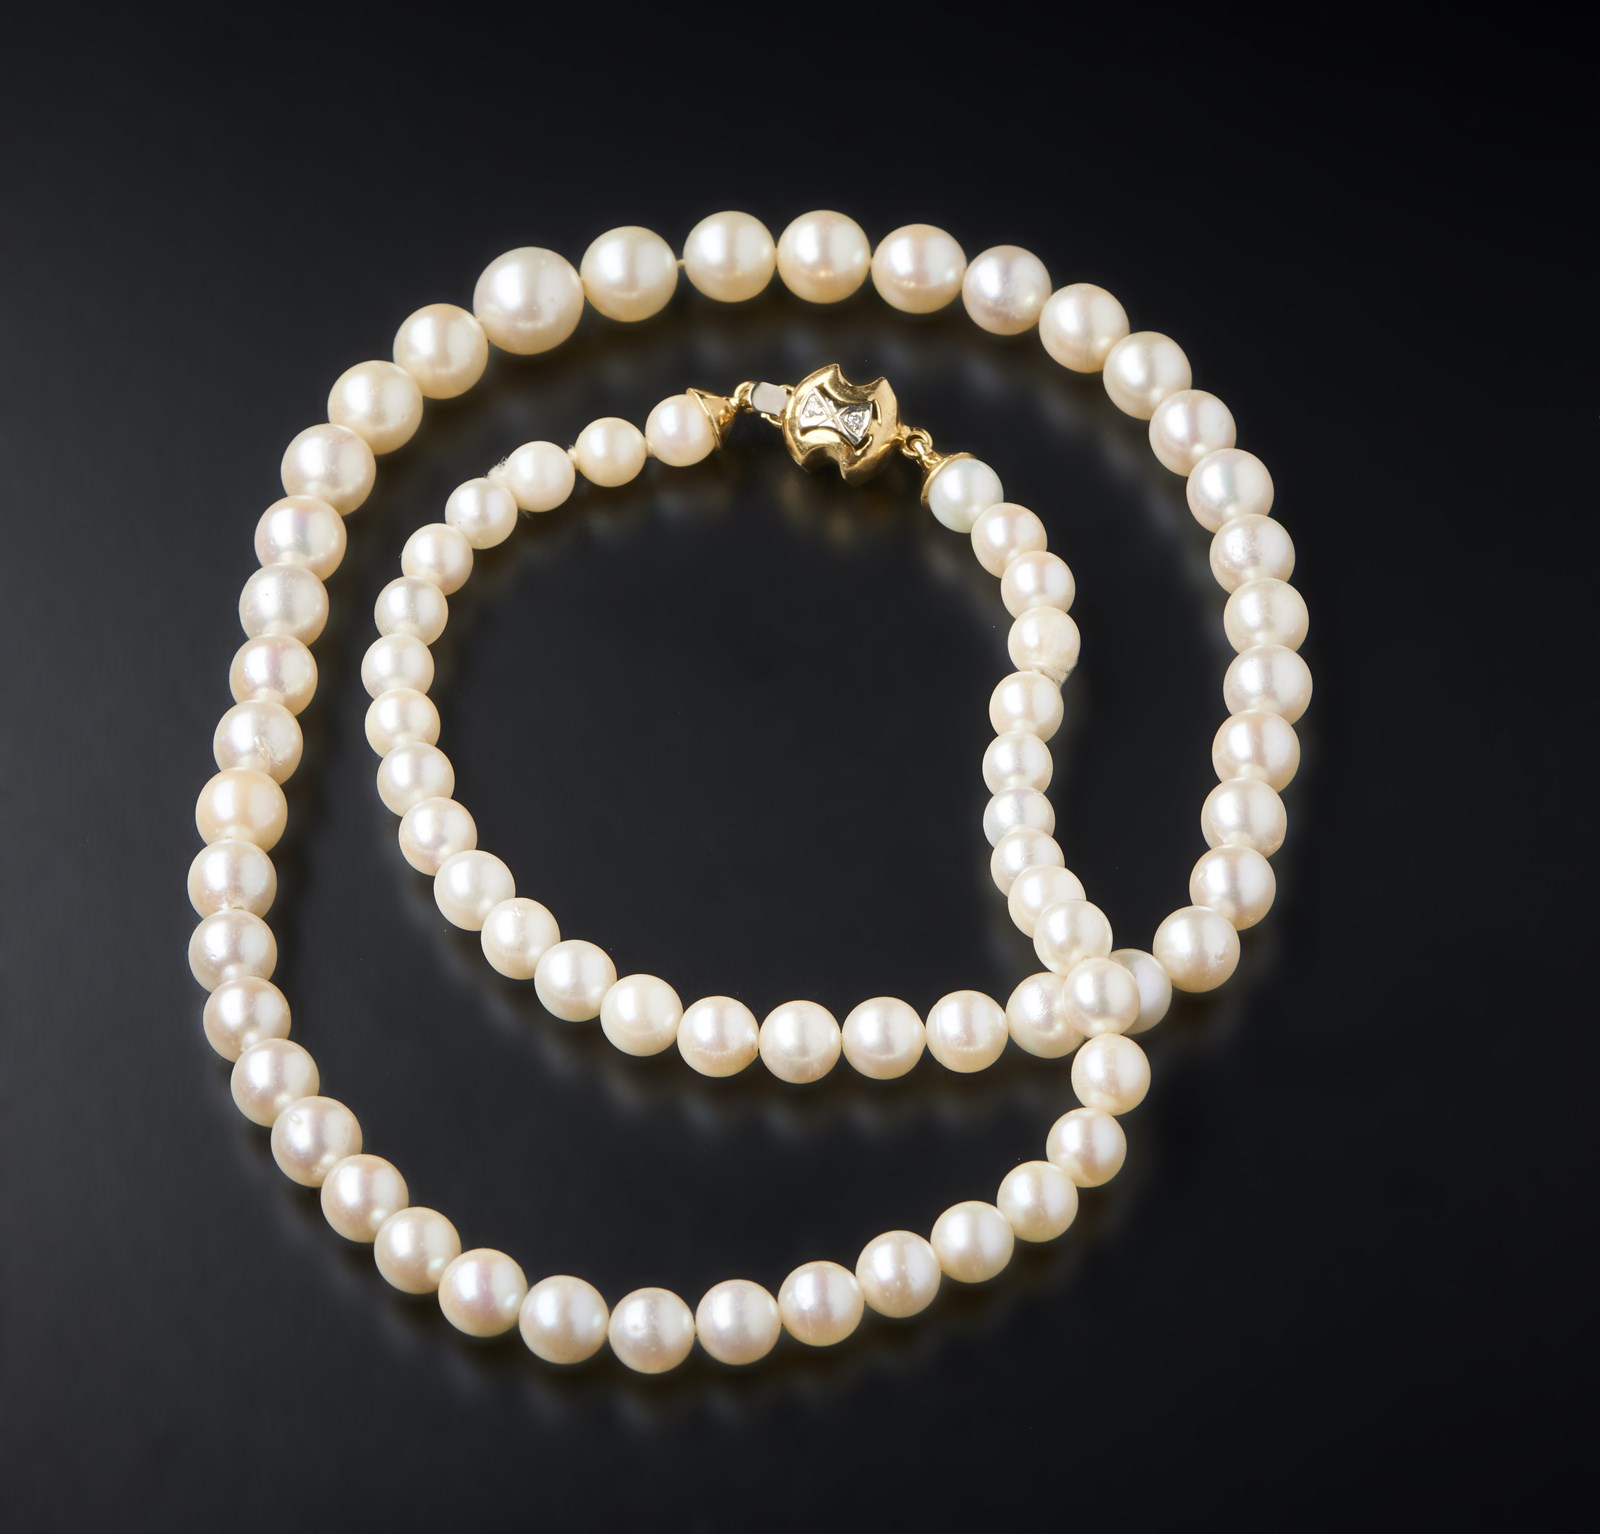 7 mm spherical white cultured pearl wire with 750/1000 yellow gold clasp and small diamonds. (Milan Kicin)